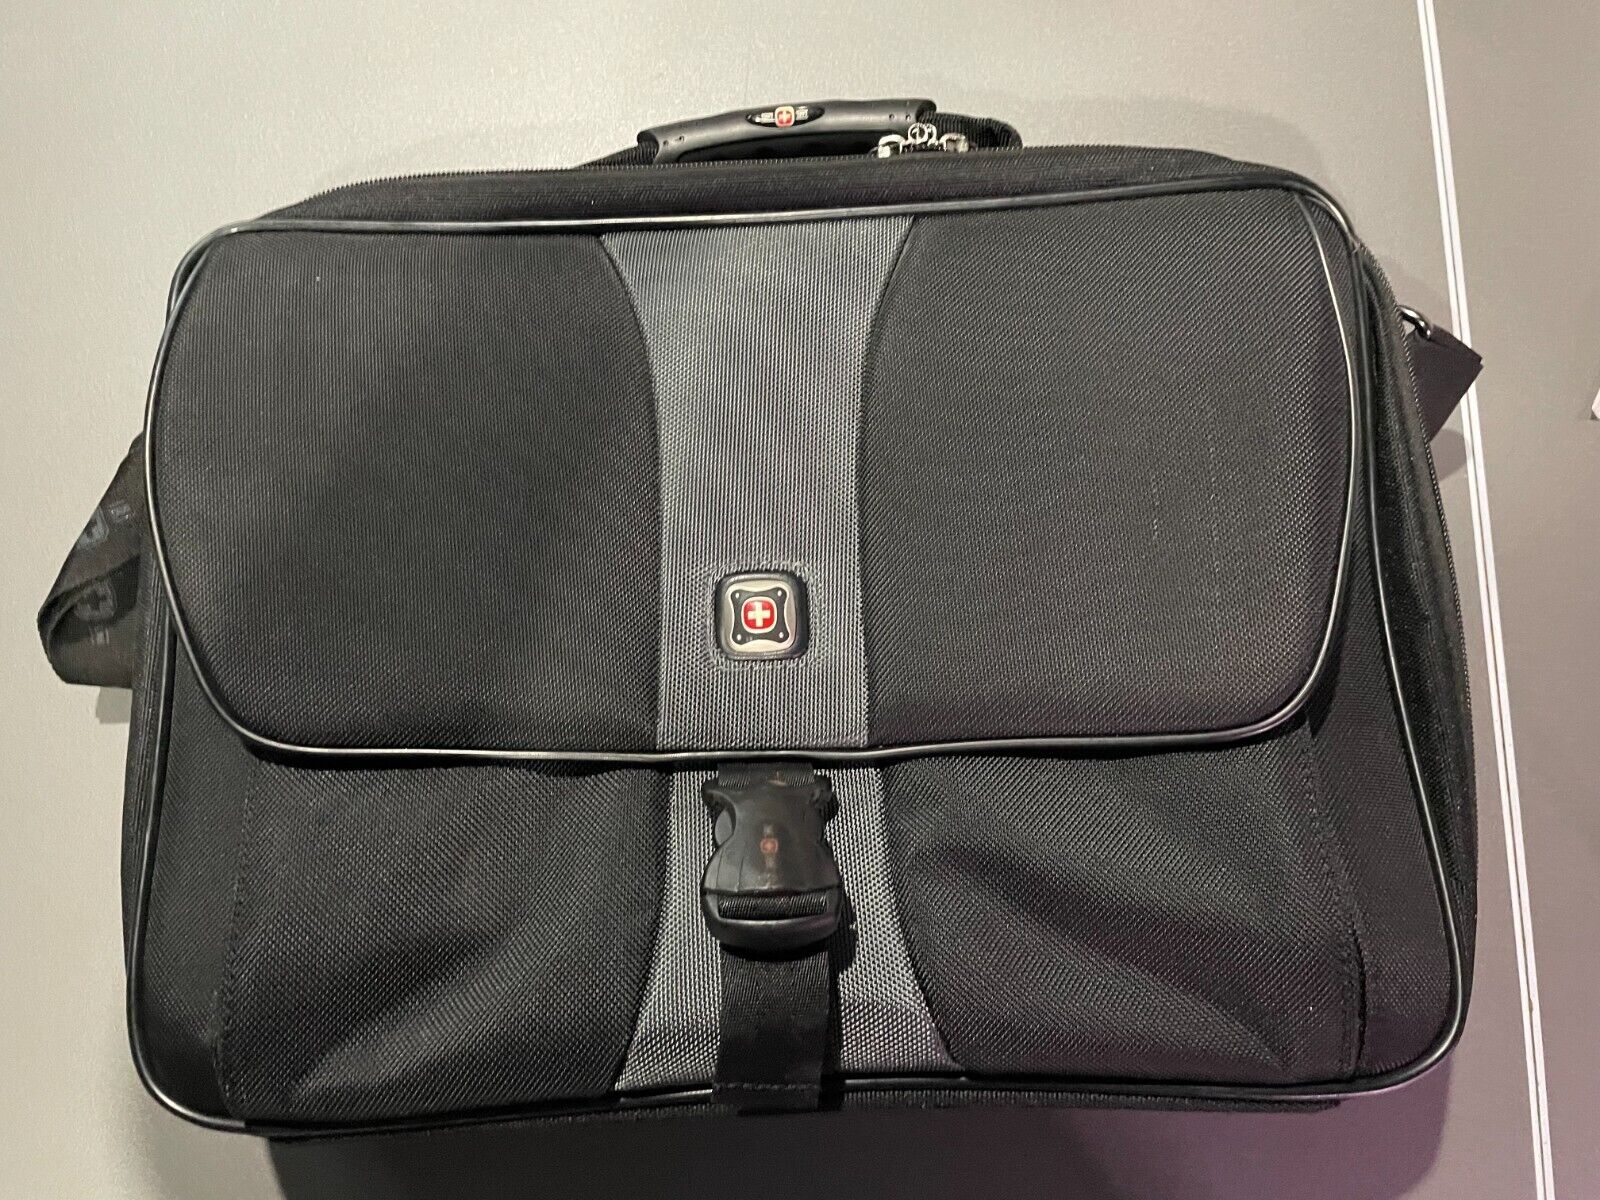 Swissgear by Wenger - 17 Inch Laptop Bag - Black - Great Condition